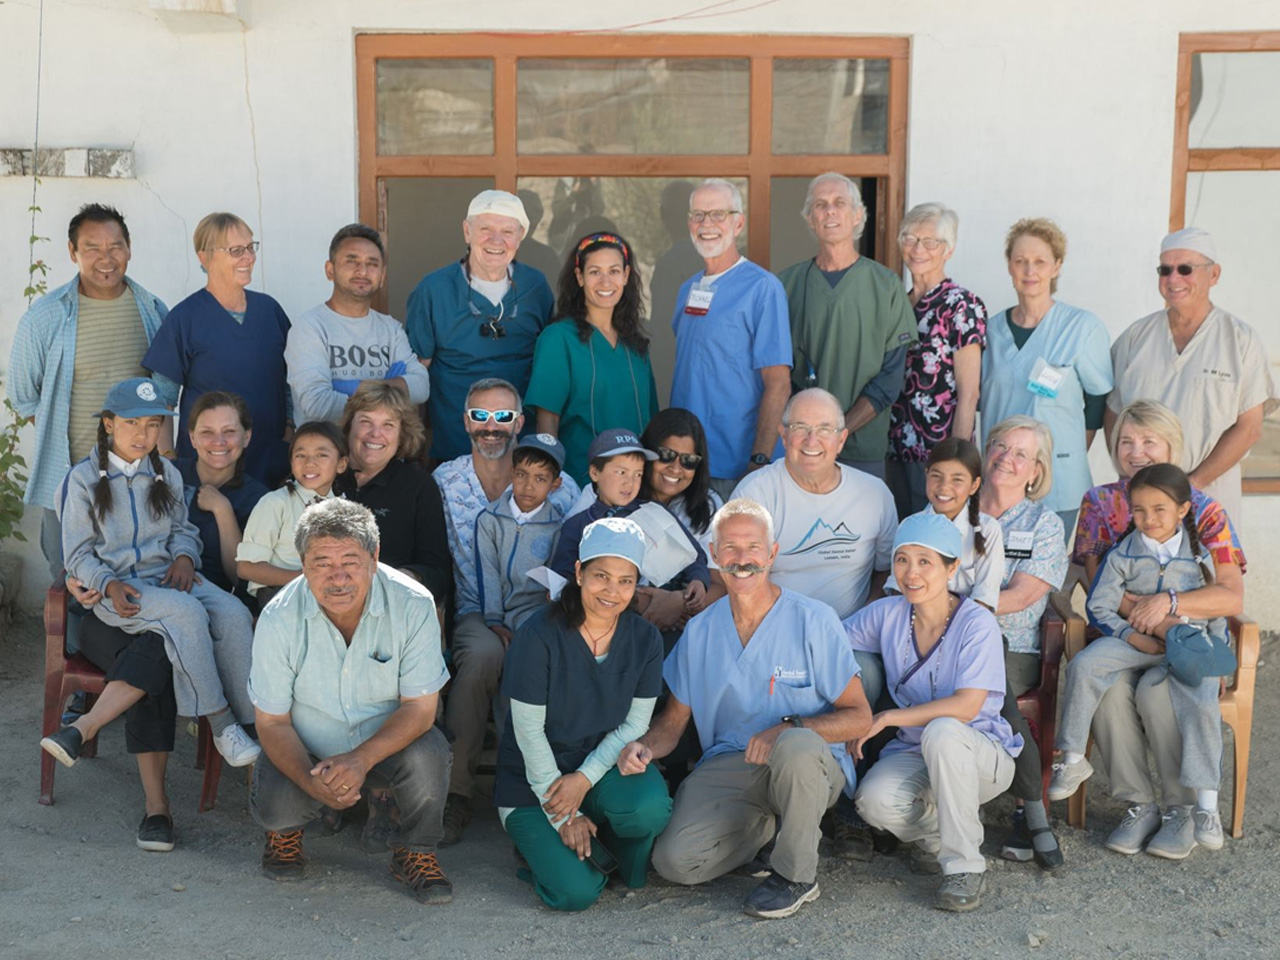 Dr. Killingsworth sponsored a patient’s 2018 dental mission trip to India